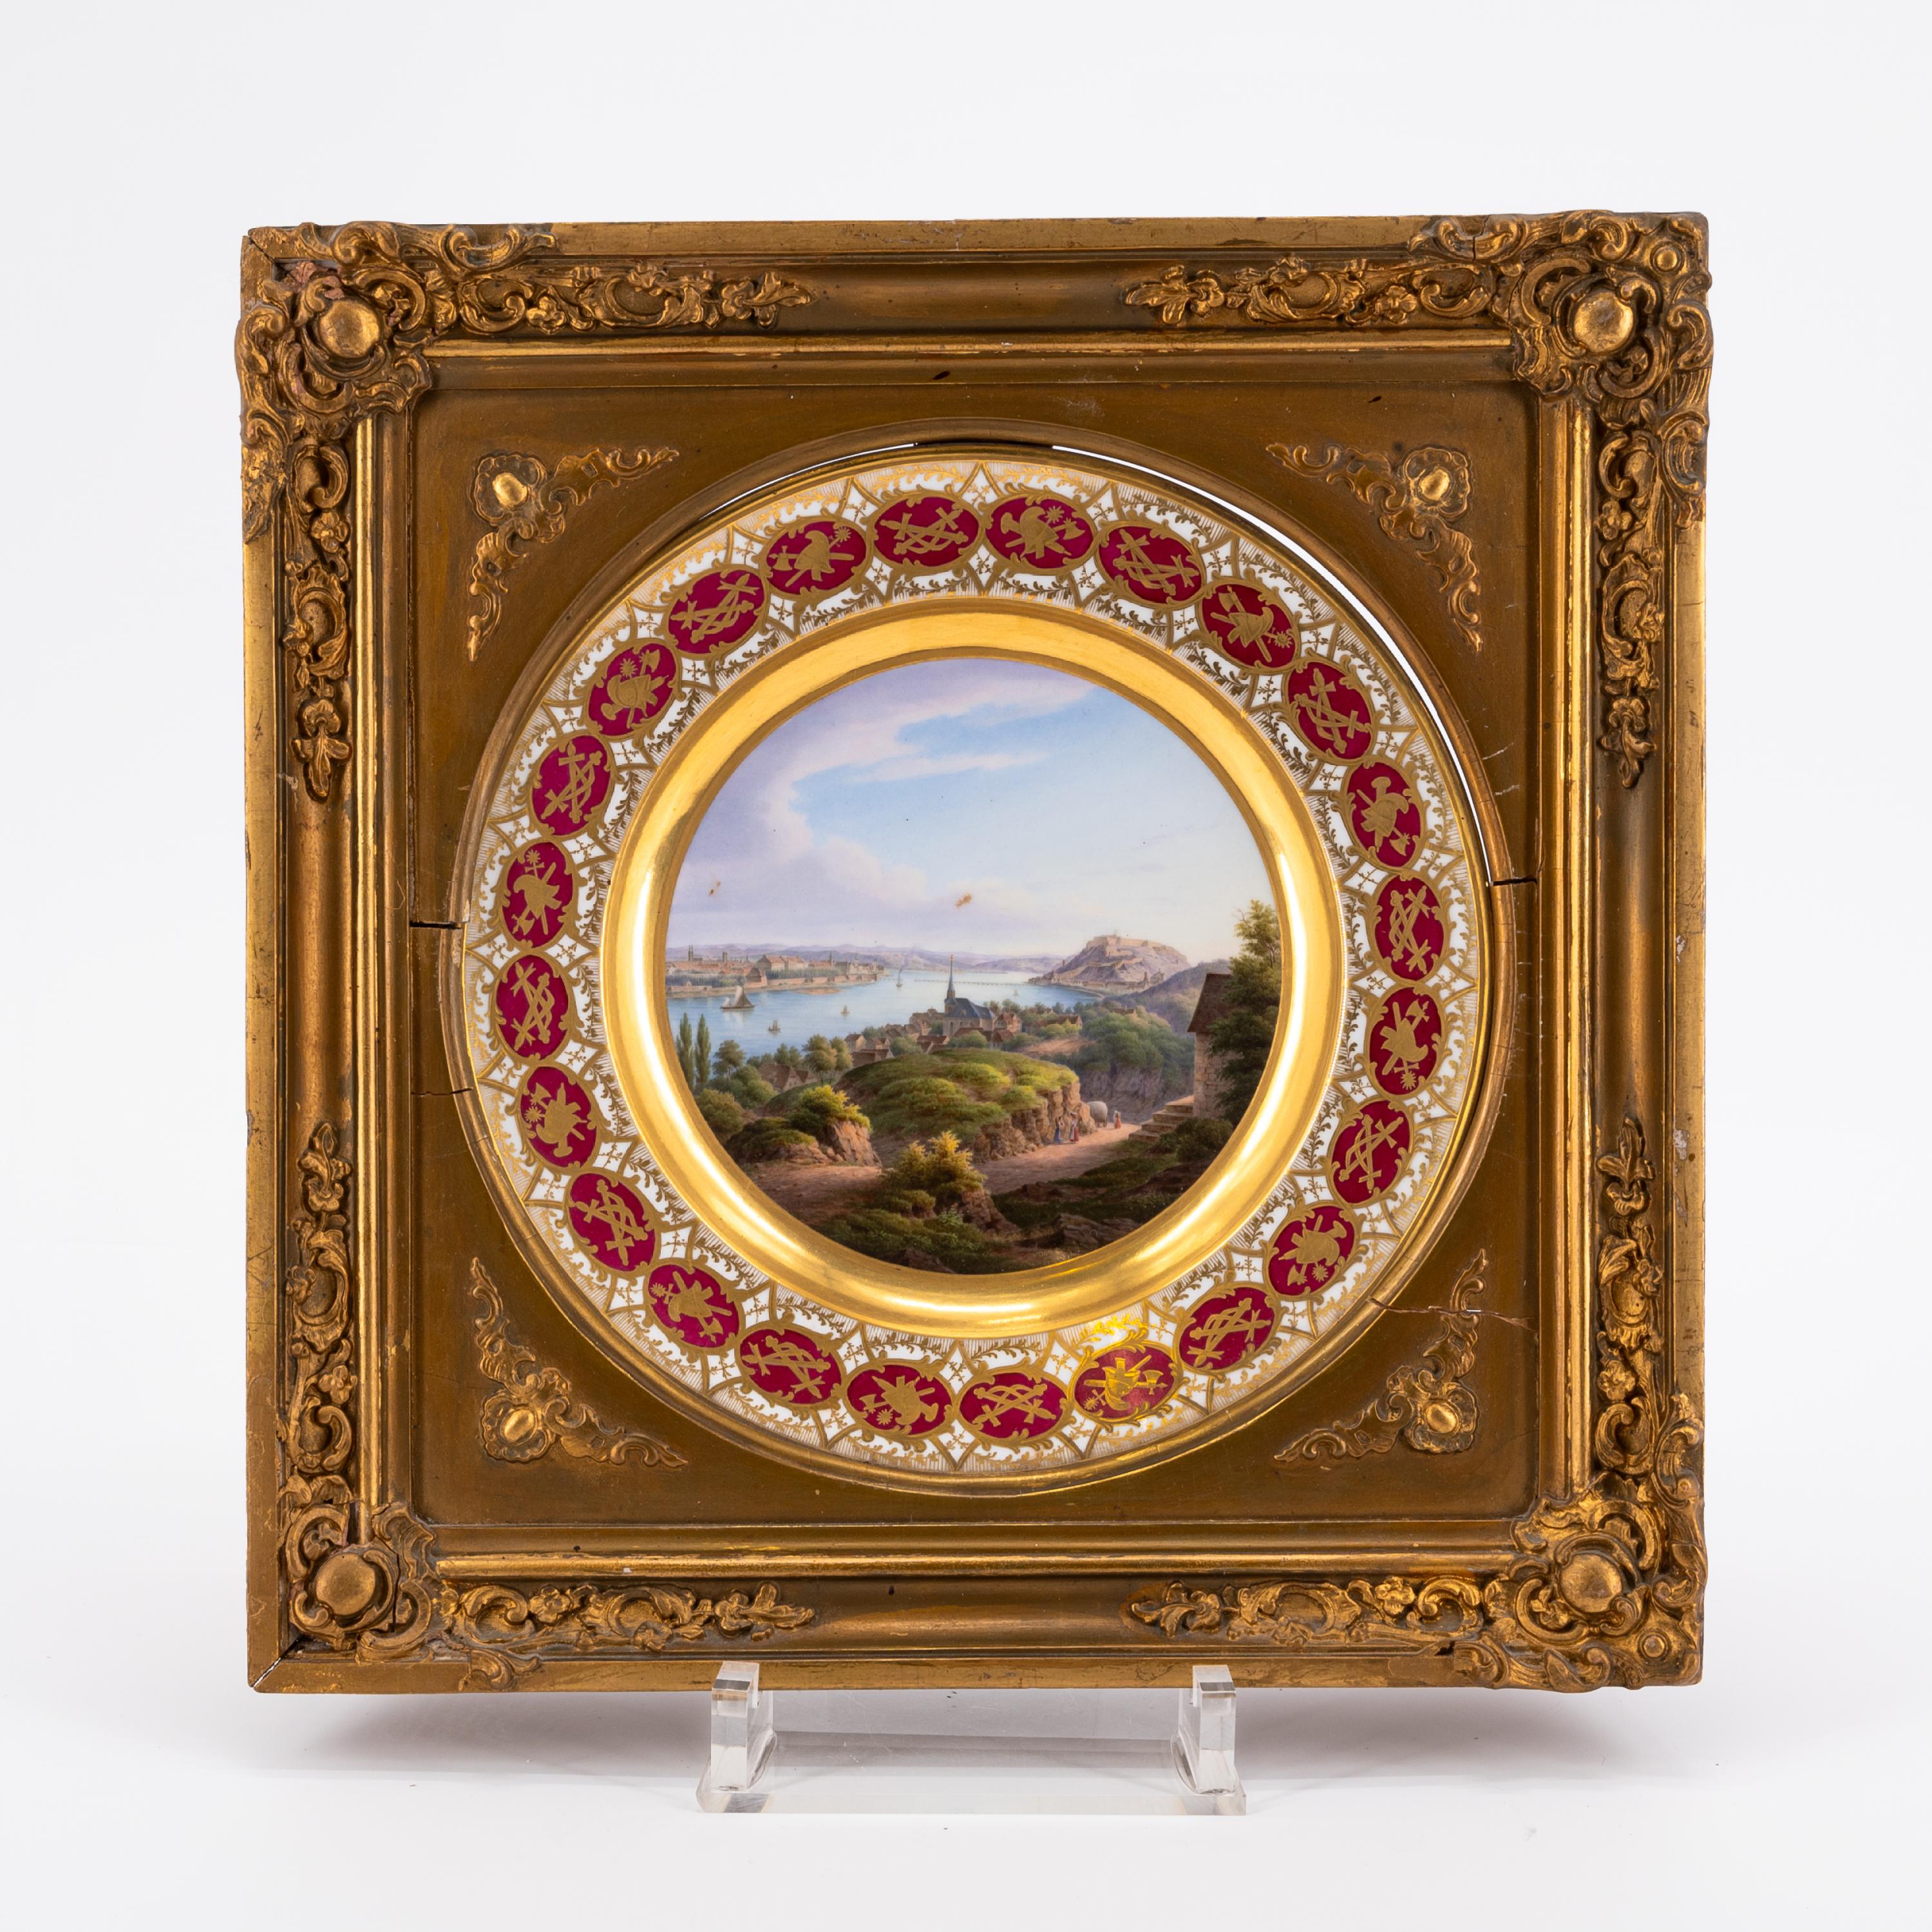 EXEPTIONAL SERIES OF TWELVE PORCELAIN PLATES WITH ROMANTIC VIEWS OF THE RHINE - Image 19 of 26